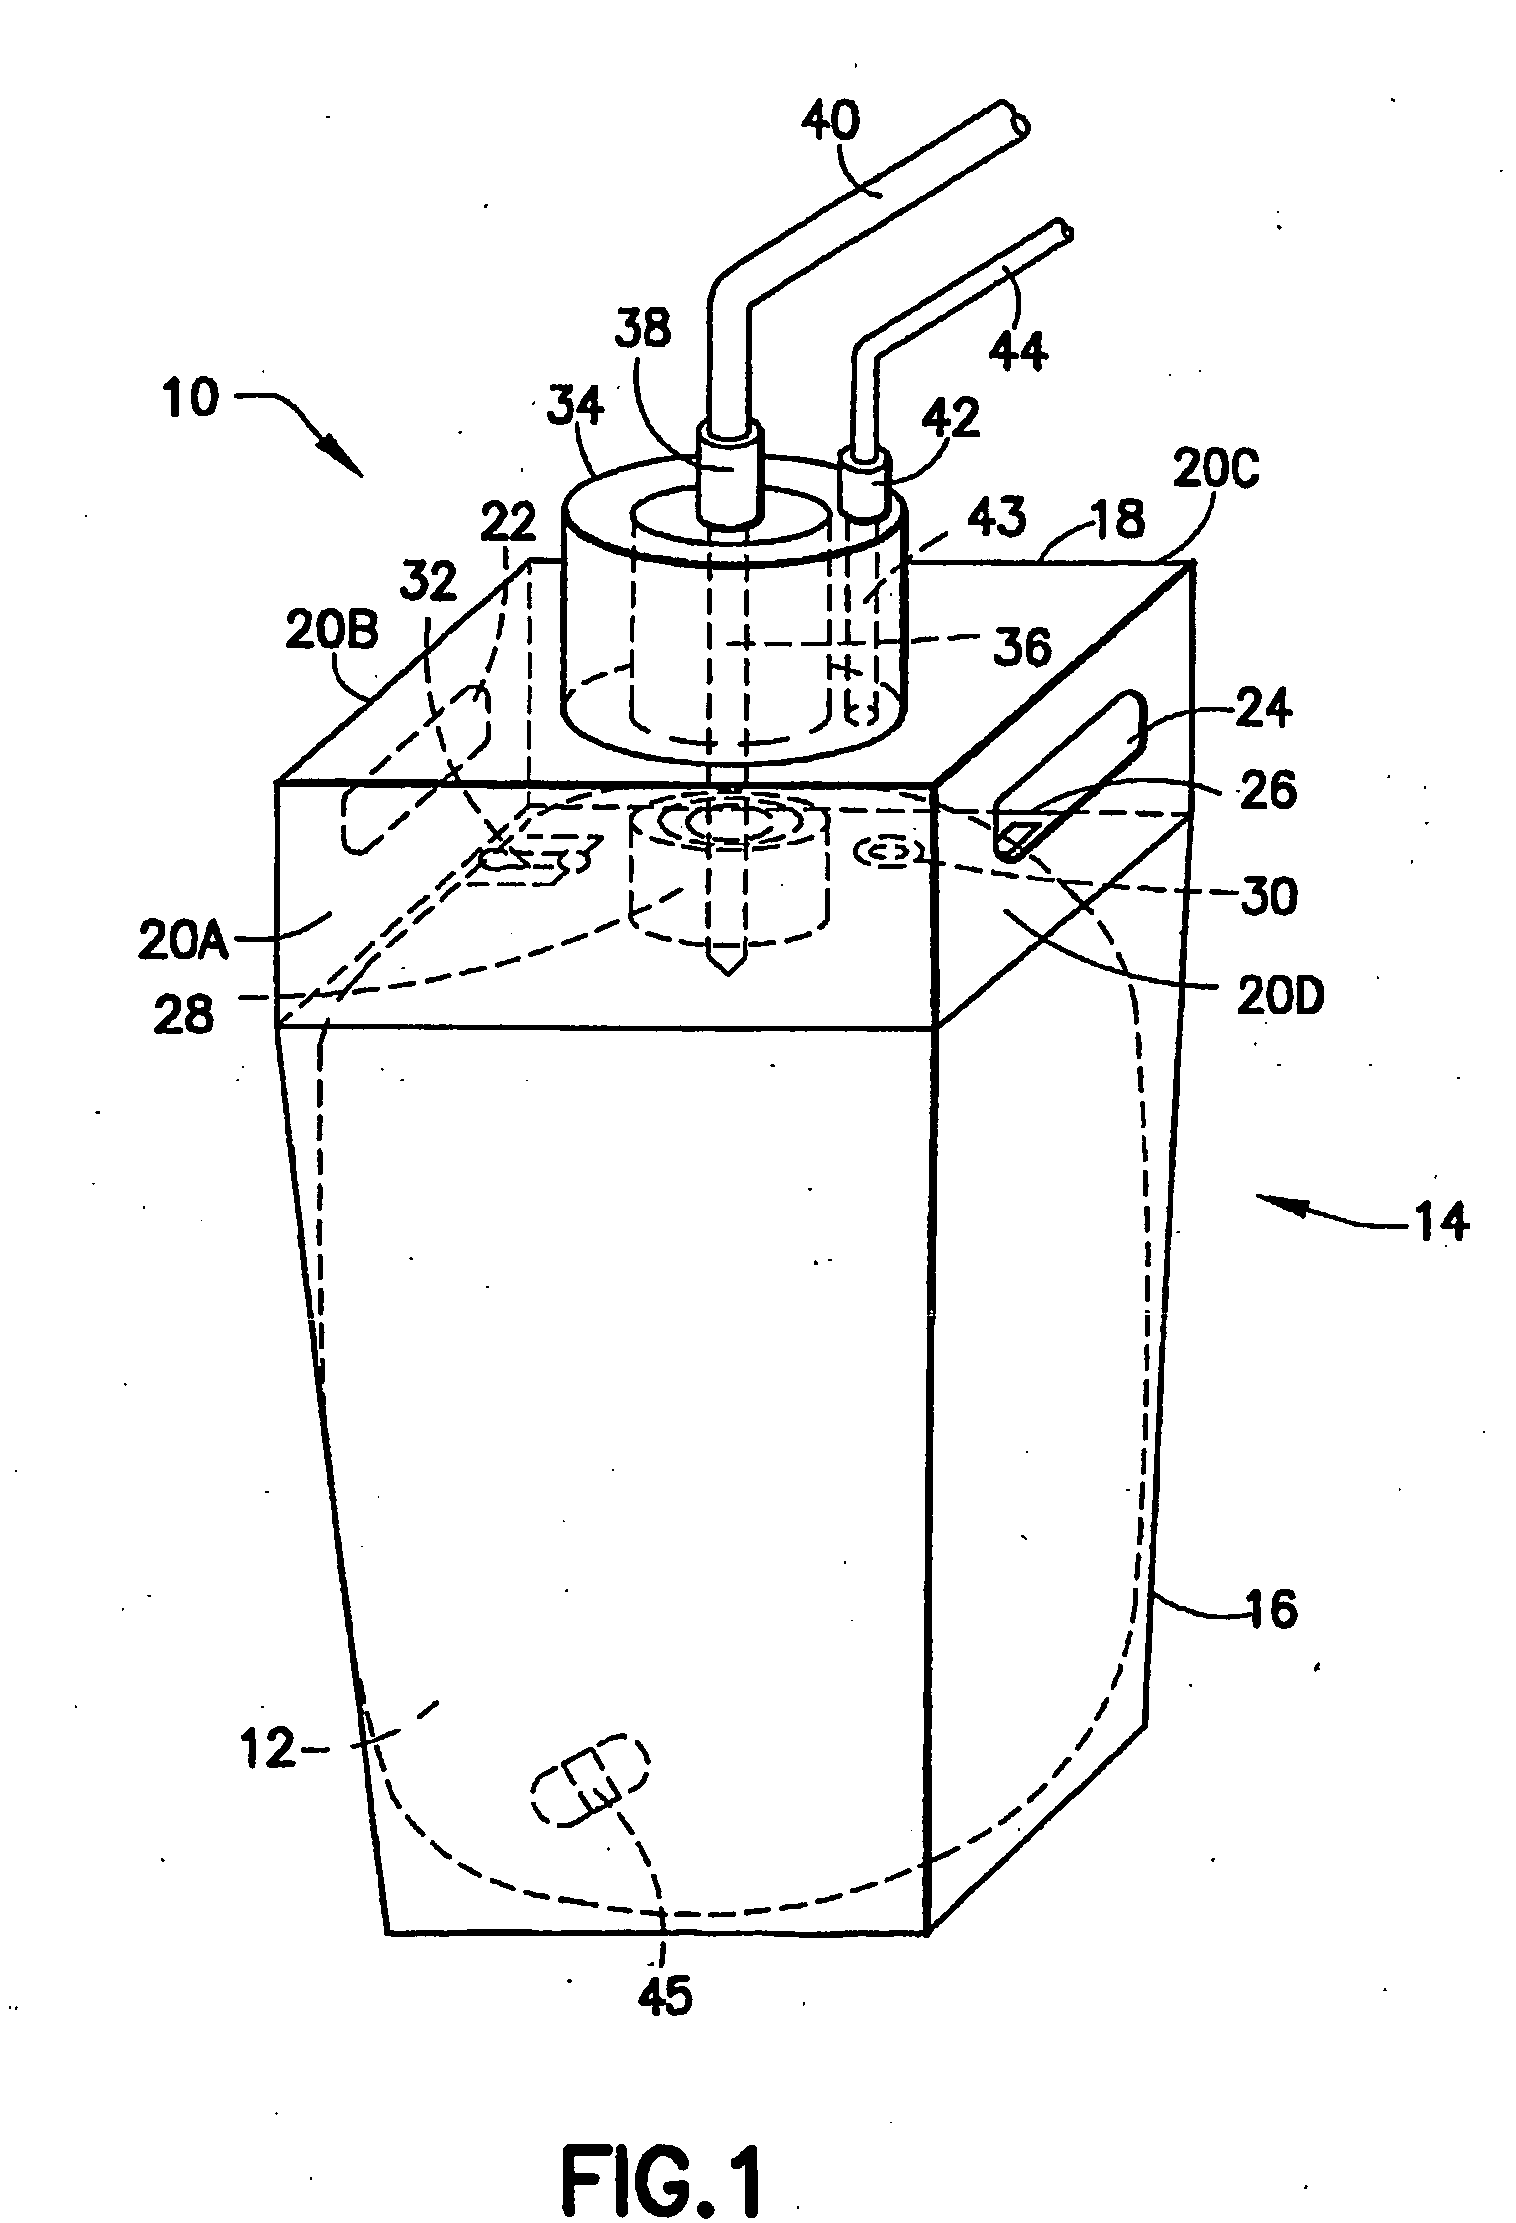 Fluid storage and dispensing systems and processes